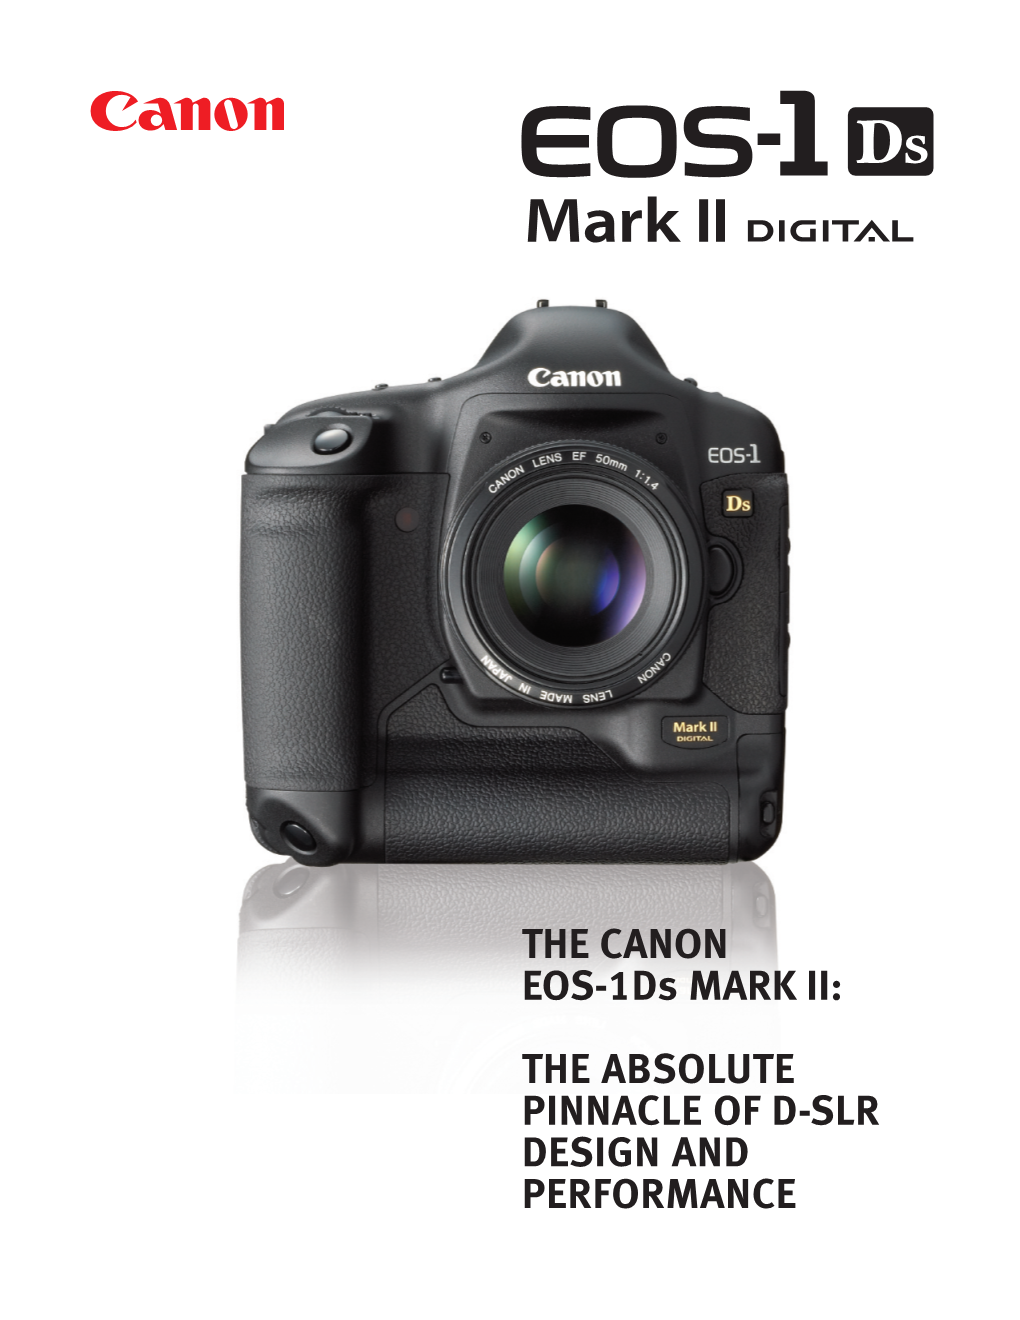 THE CANON EOS-1Ds MARK II: the ABSOLUTE PINNACLE of D-SLR DESIGN and PERFORMANCE